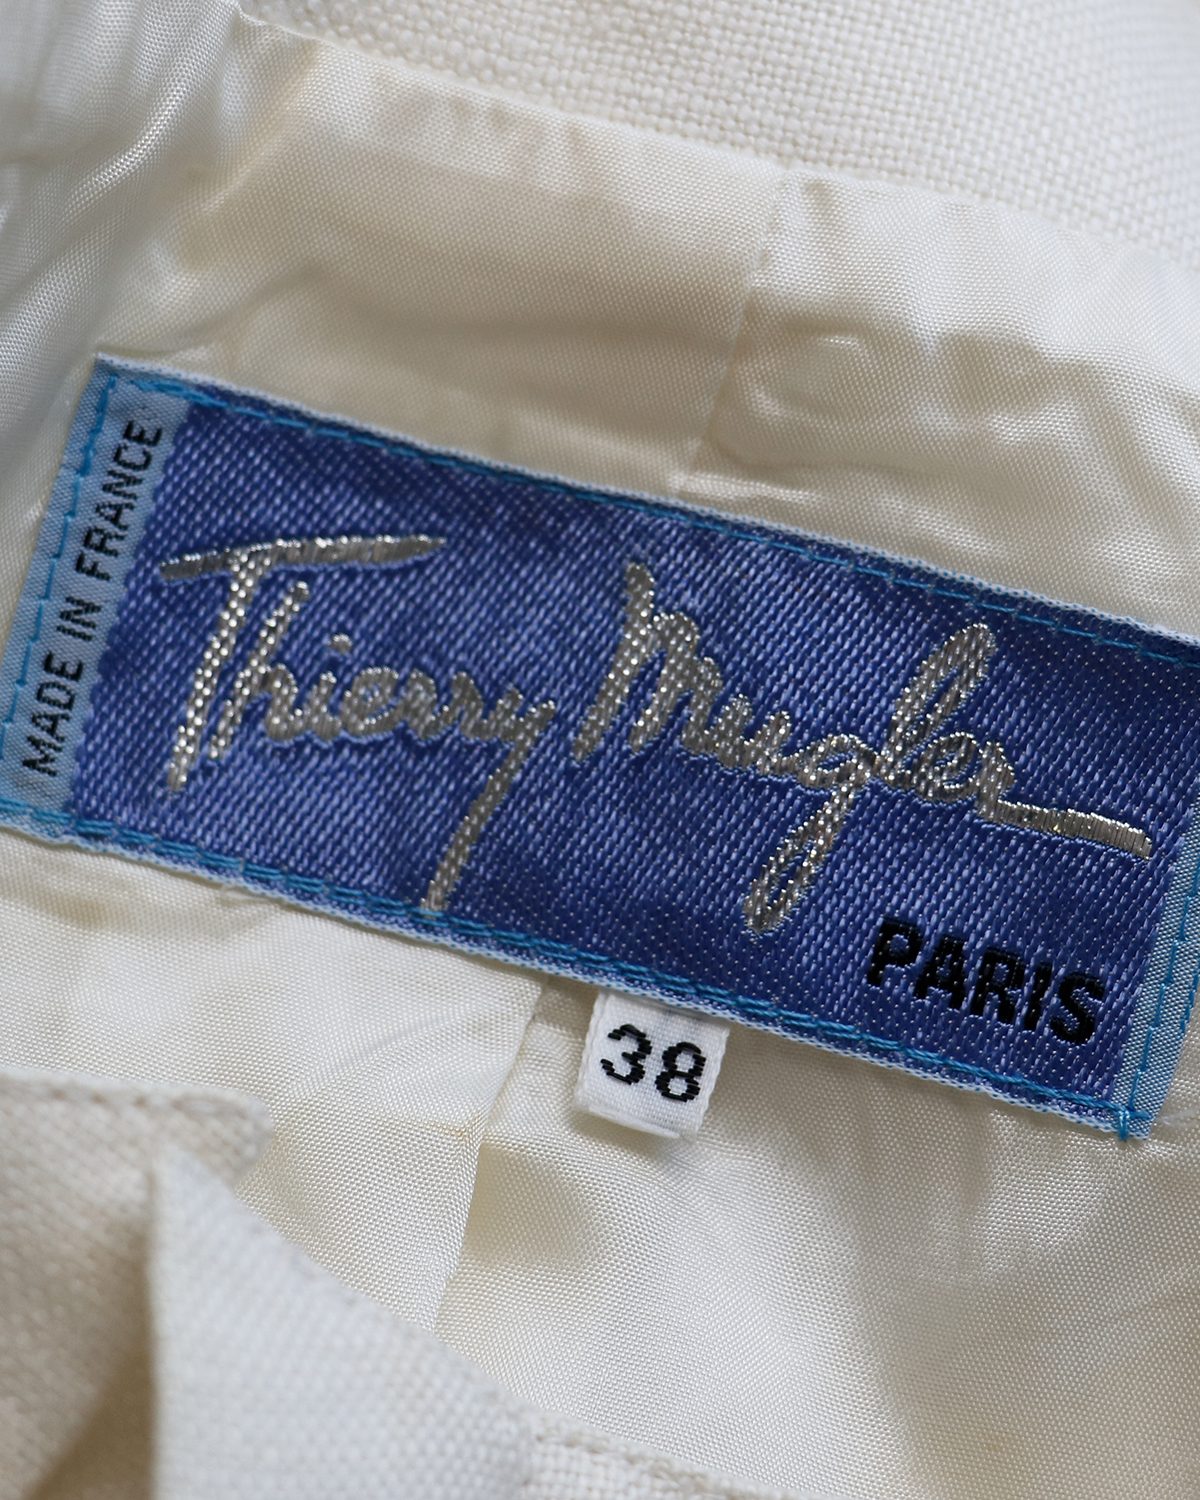 Thierry Mugler Ivory Suit from 1980s